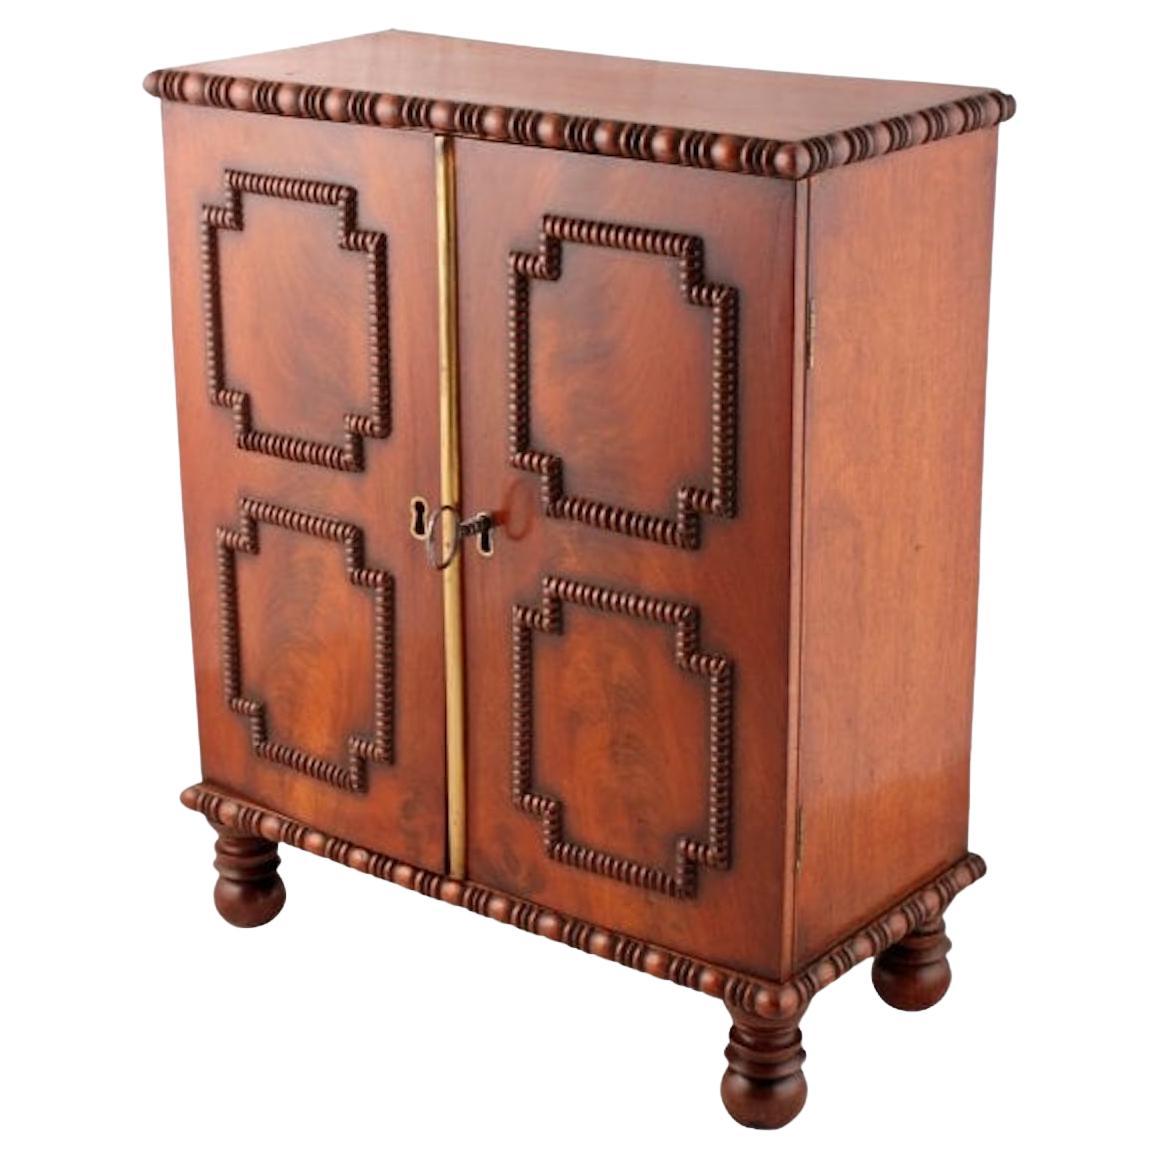 Regency Mahogany table cabinet

An early 19th century Regency mahogany two door table cabinet.

The cabinet is decorated with half round bobbin turned mouldings to the top and bottom edges and doors.

Where the doors meet is a gilt brass half